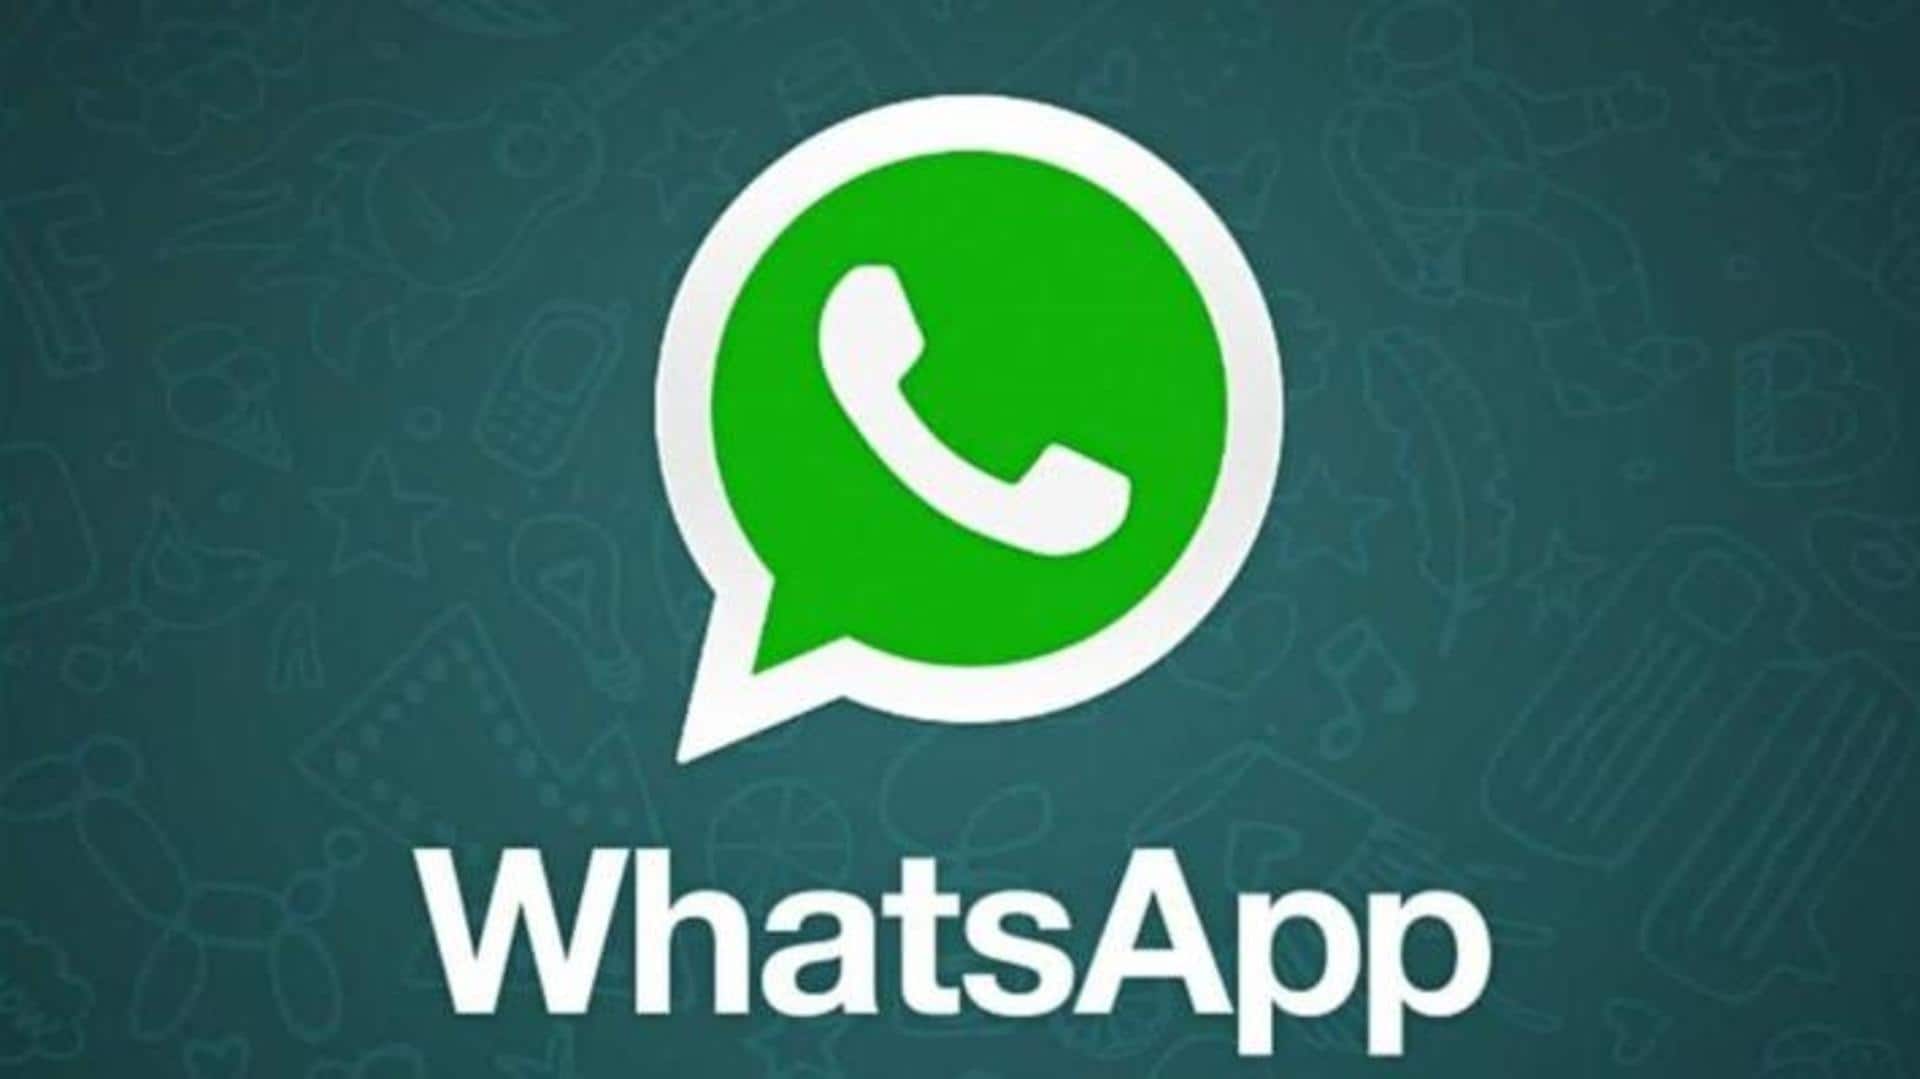 WhatsApp's companion mode will allow you to link 4 devices